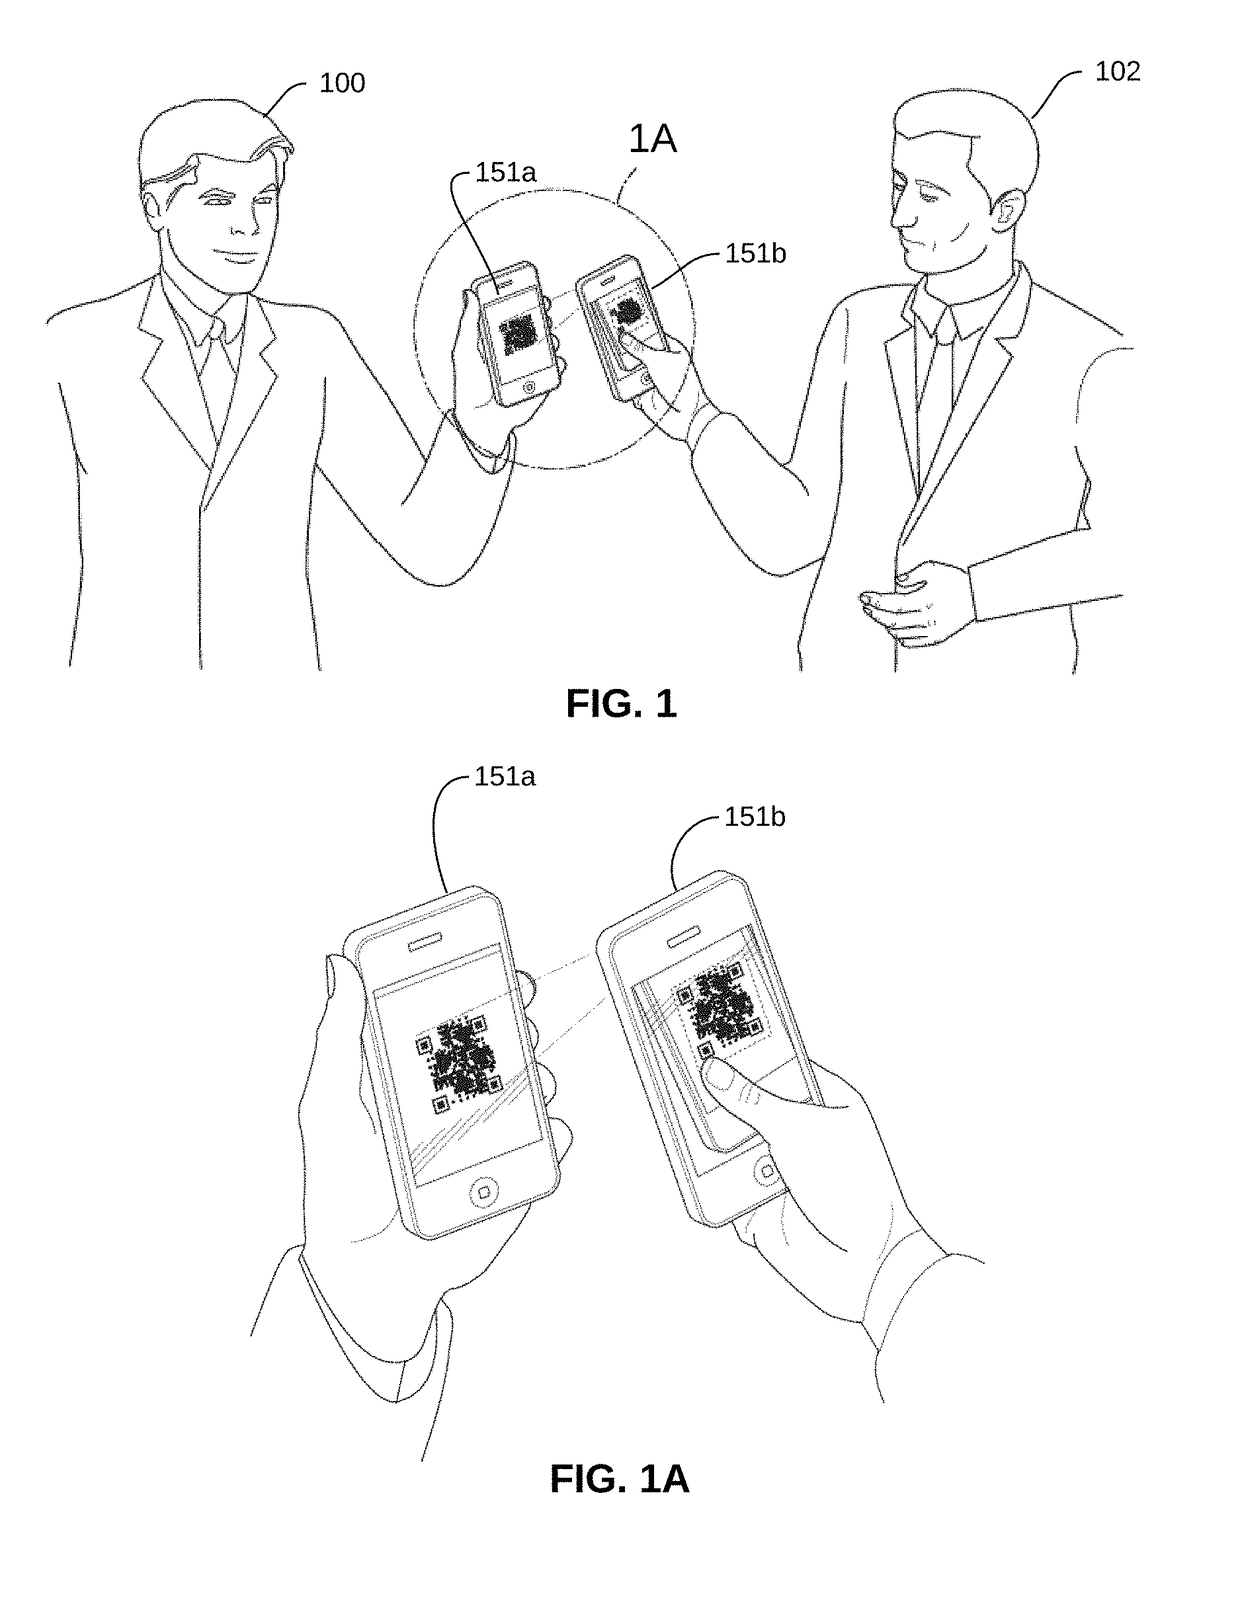 System and method for intelligently managing and distributing electronic business cards